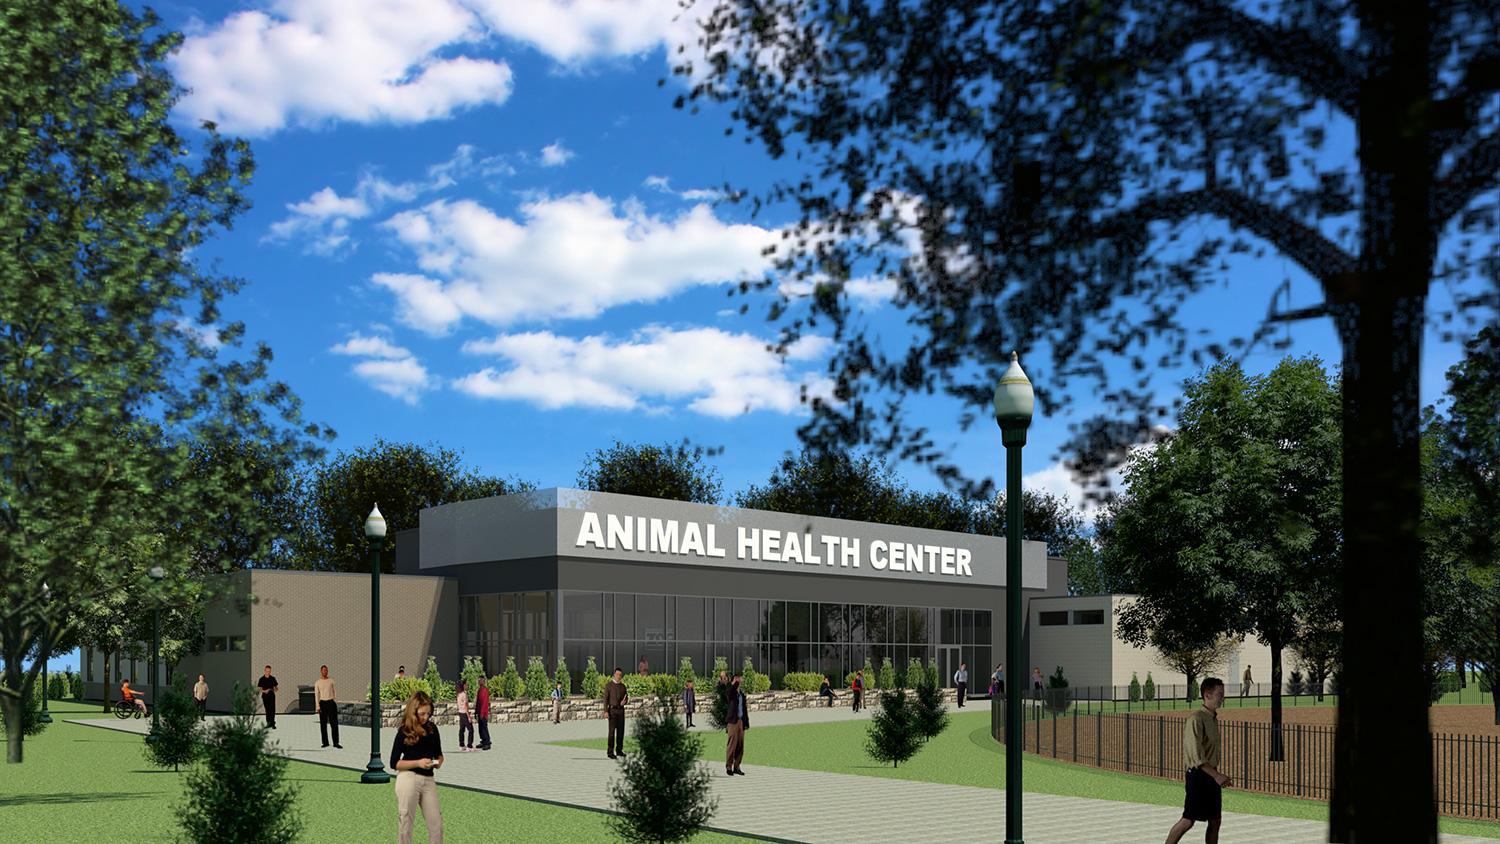 Friends of the Zoo launches animal health center capital campaign -  